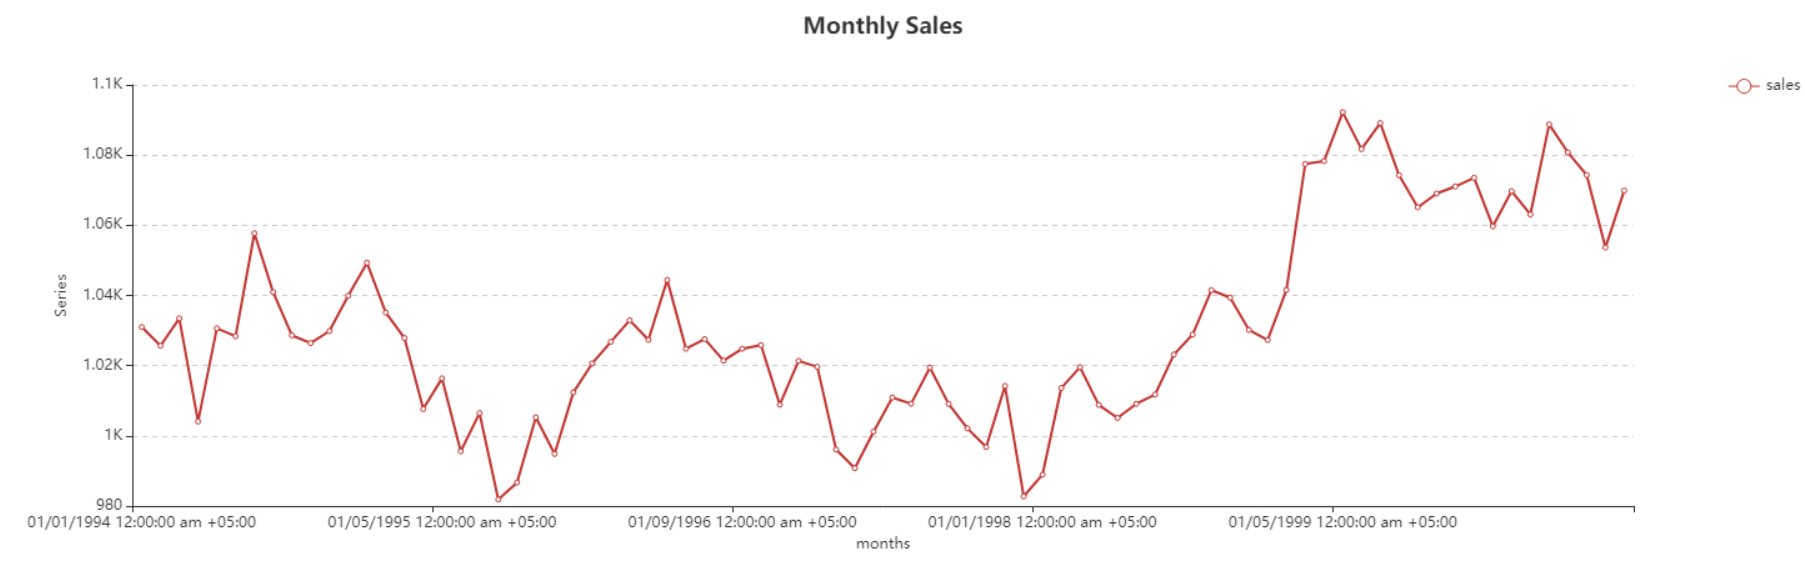 02-double-monthly-sales